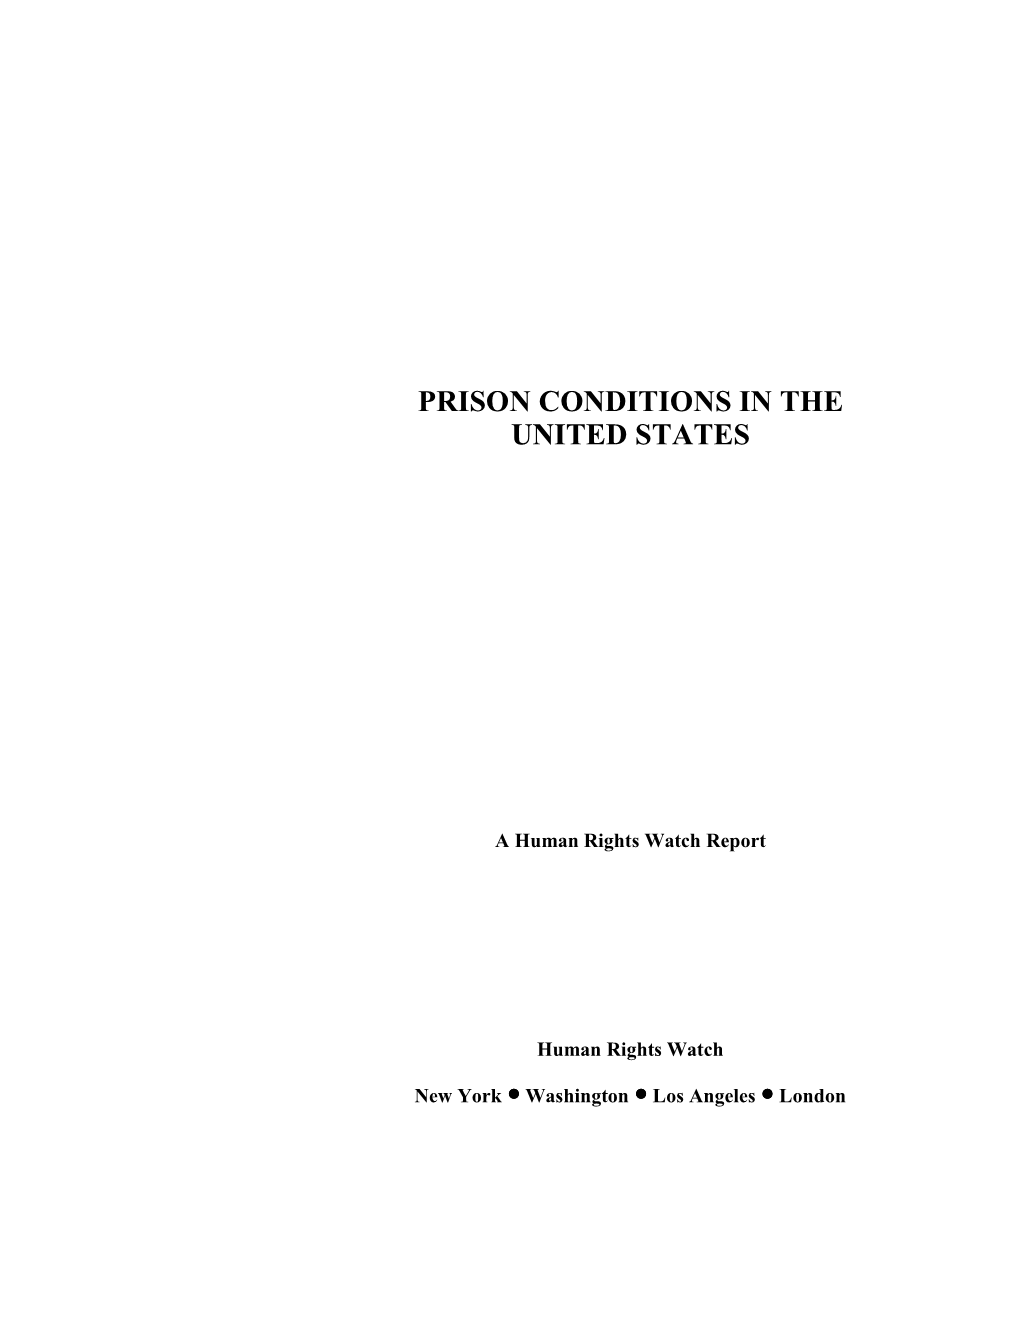 Prison Conditions in the United States